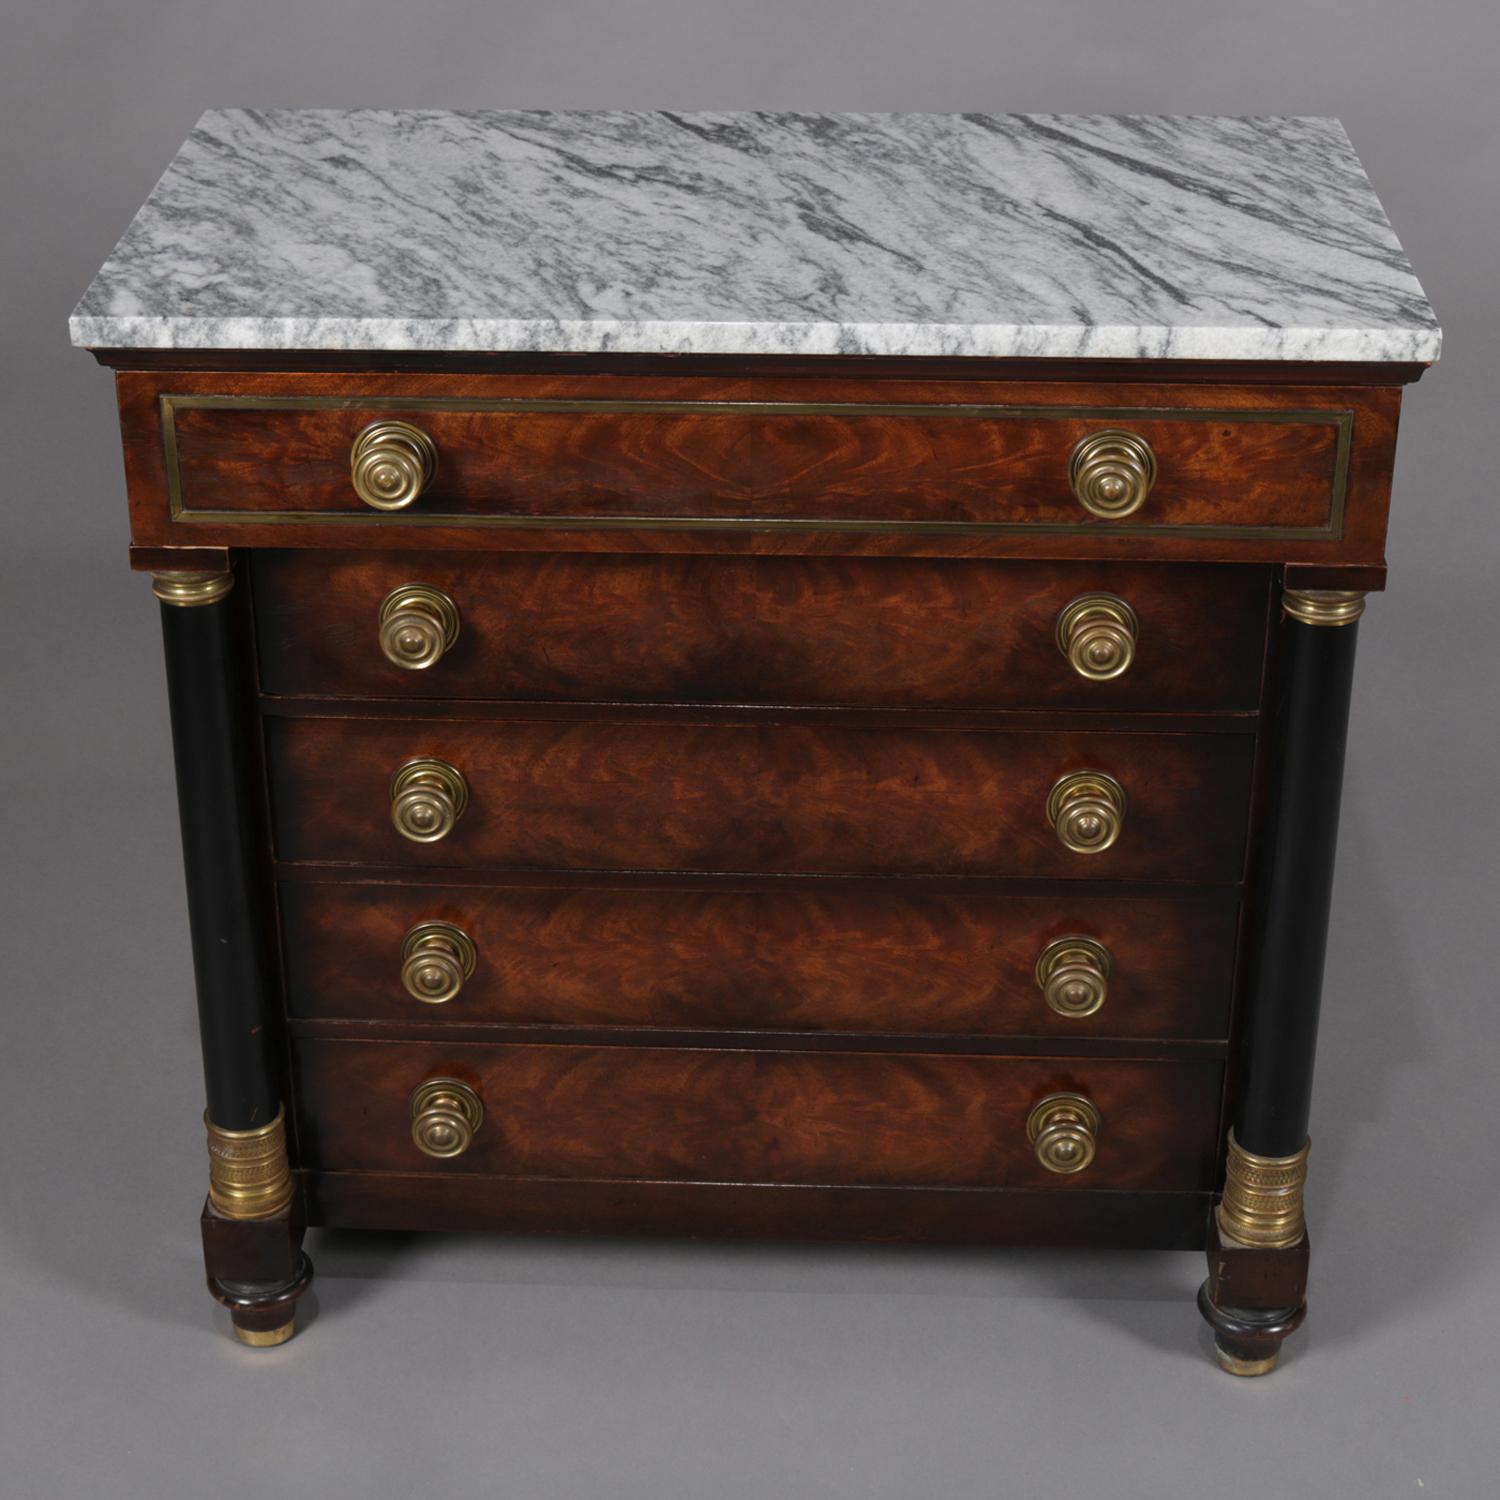 Antique French Empire Charles-Honore Lannuier School Chest features mahogany construction with marble top over upper frieze drawer above four lower long drawers each having bookmatched figured flame mahogany and inset bronze banding and flanked by